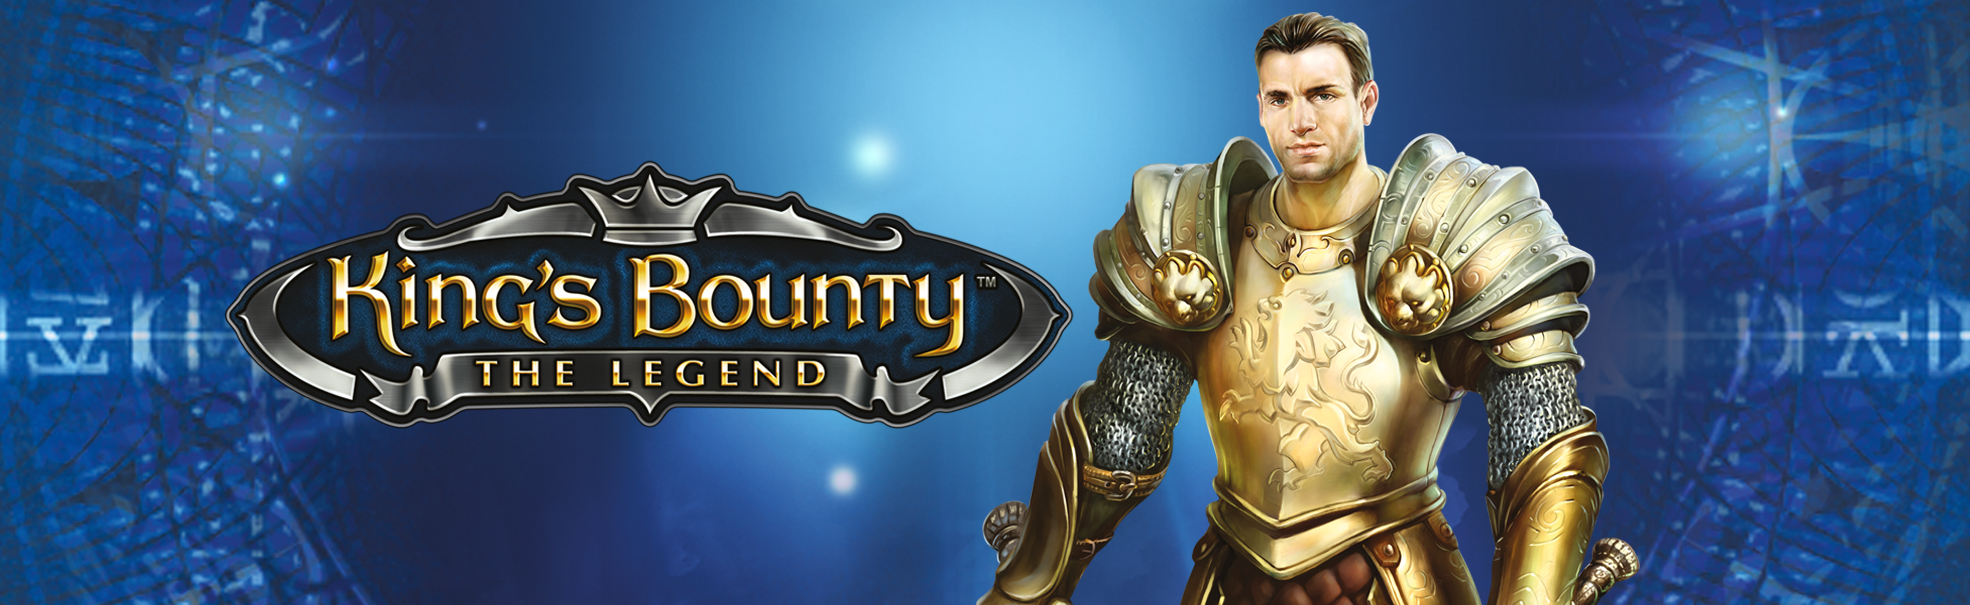 King's Bounty: The Legend